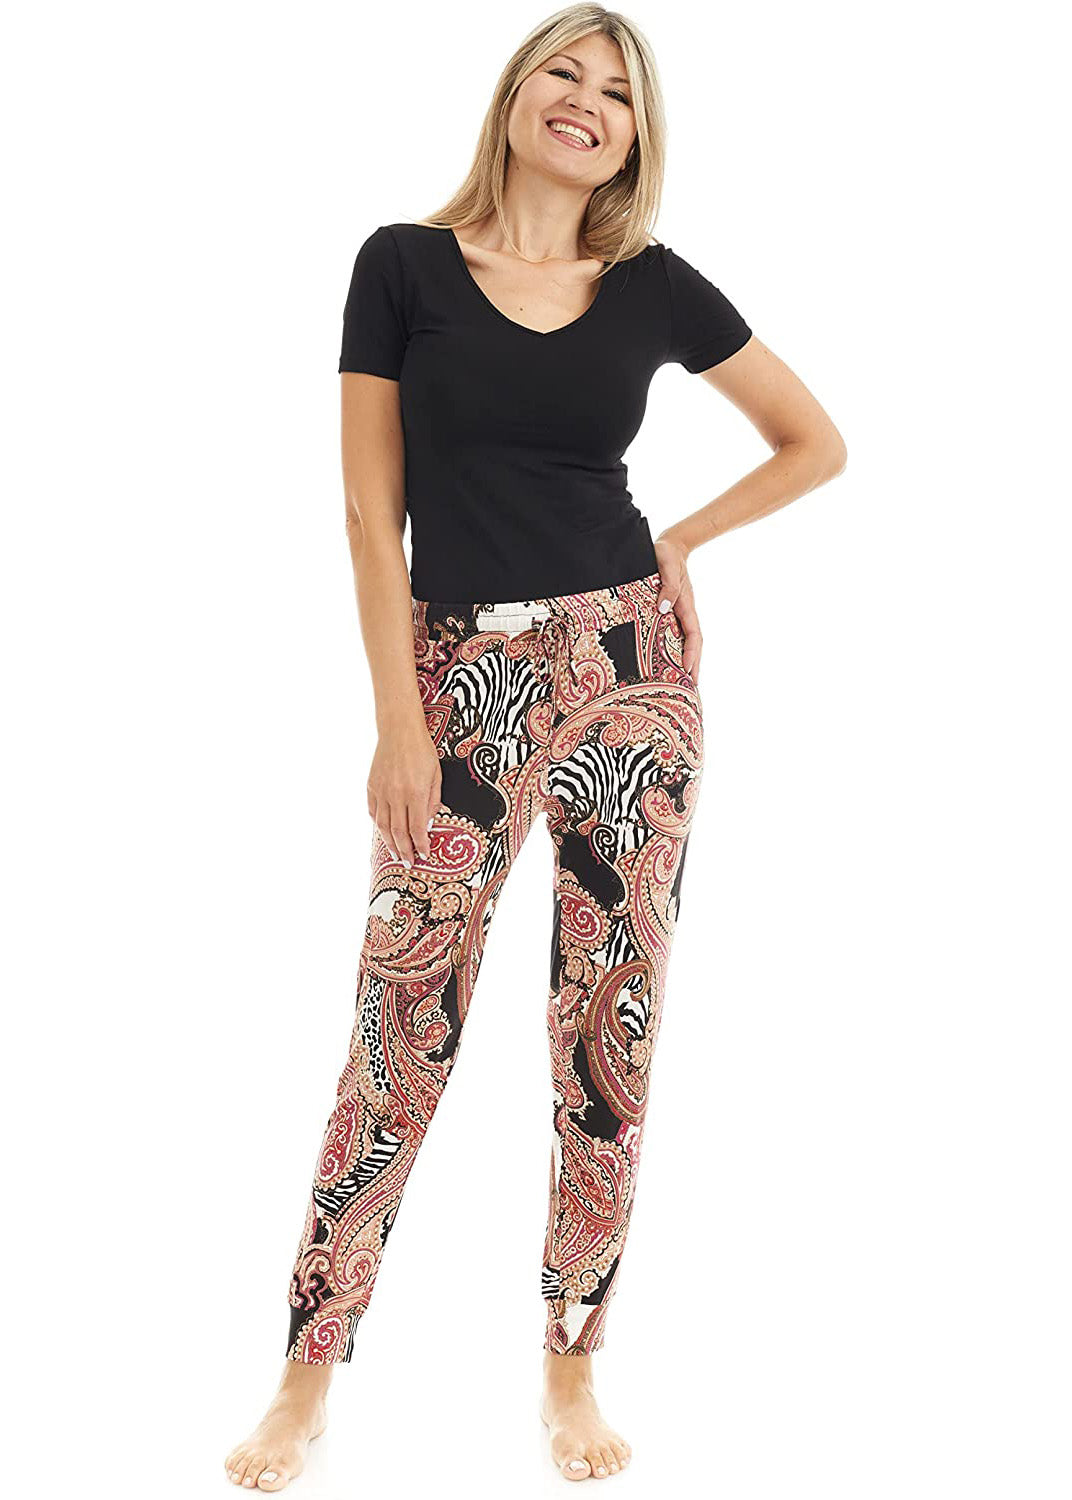 Bamboo wide-leg pyjama bottoms with elastic waistband, drawstring, and open bottom leg. Paisley Pattern is orange, red, black and white